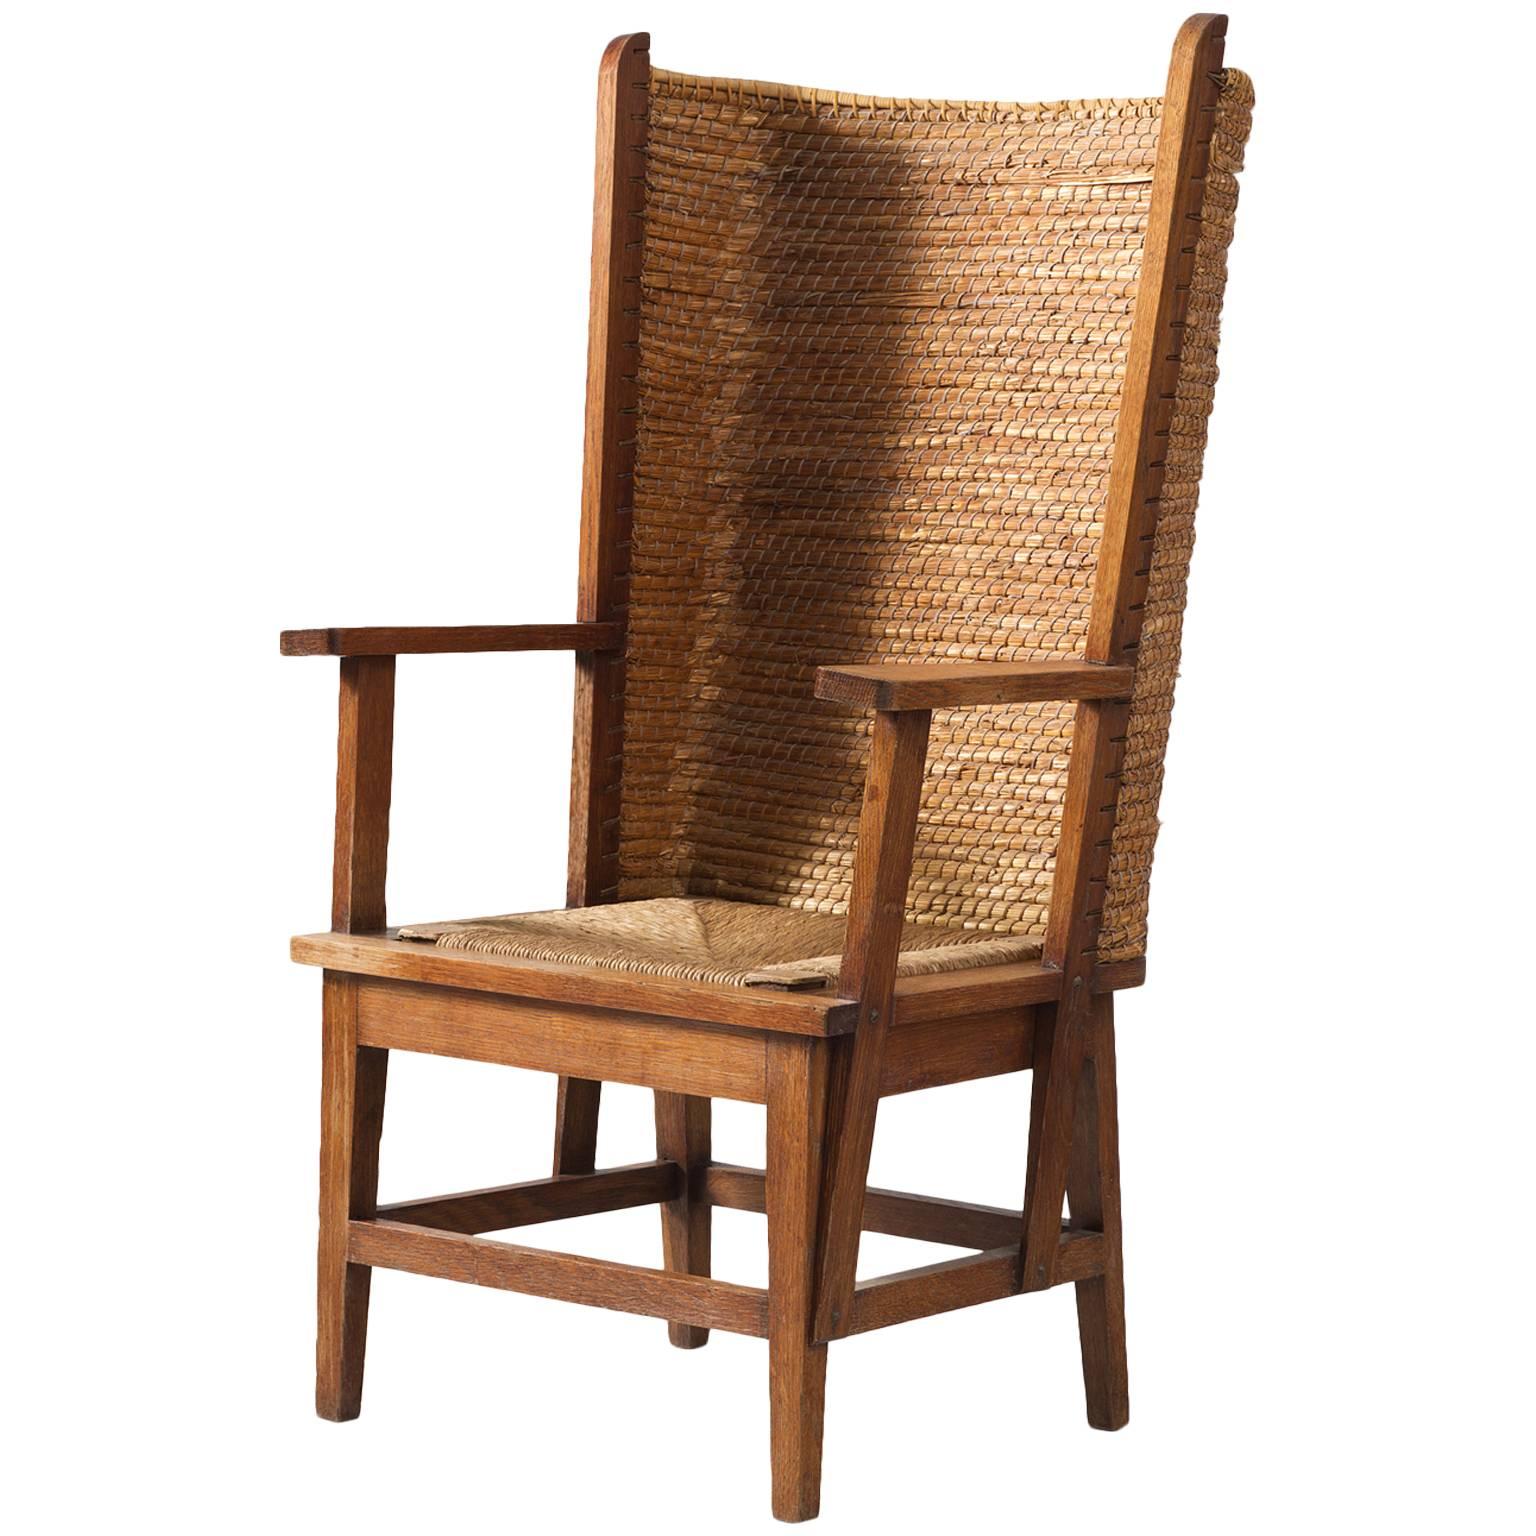 Scottish Orkney Chair with Woven Back and Oak Frame